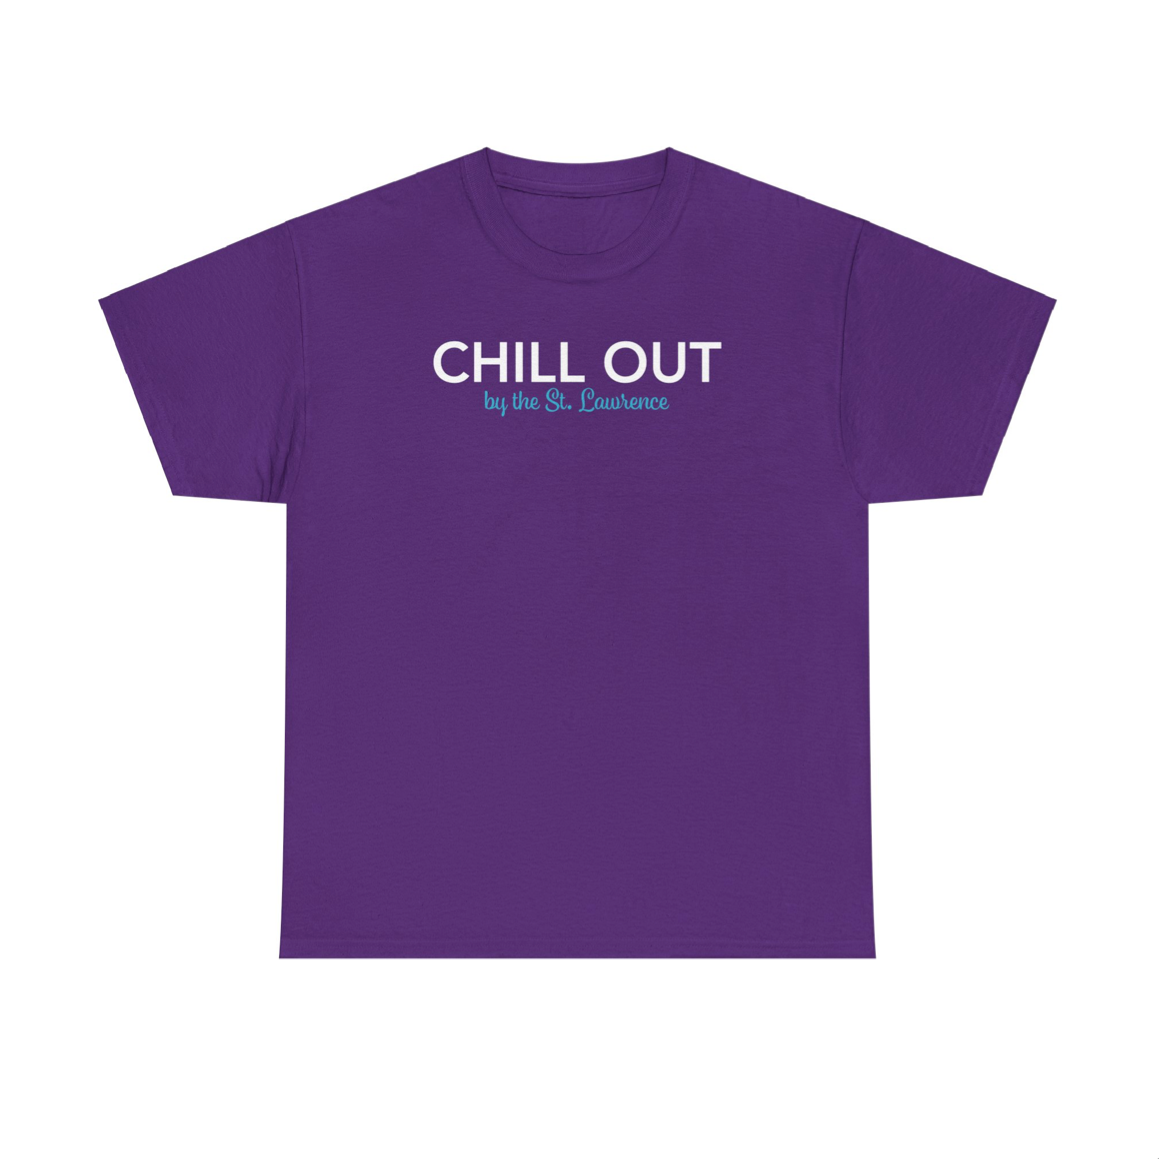 CHILL OUT by the St. Lawrence – Unisex Heavy Cotton Tee    U.S.